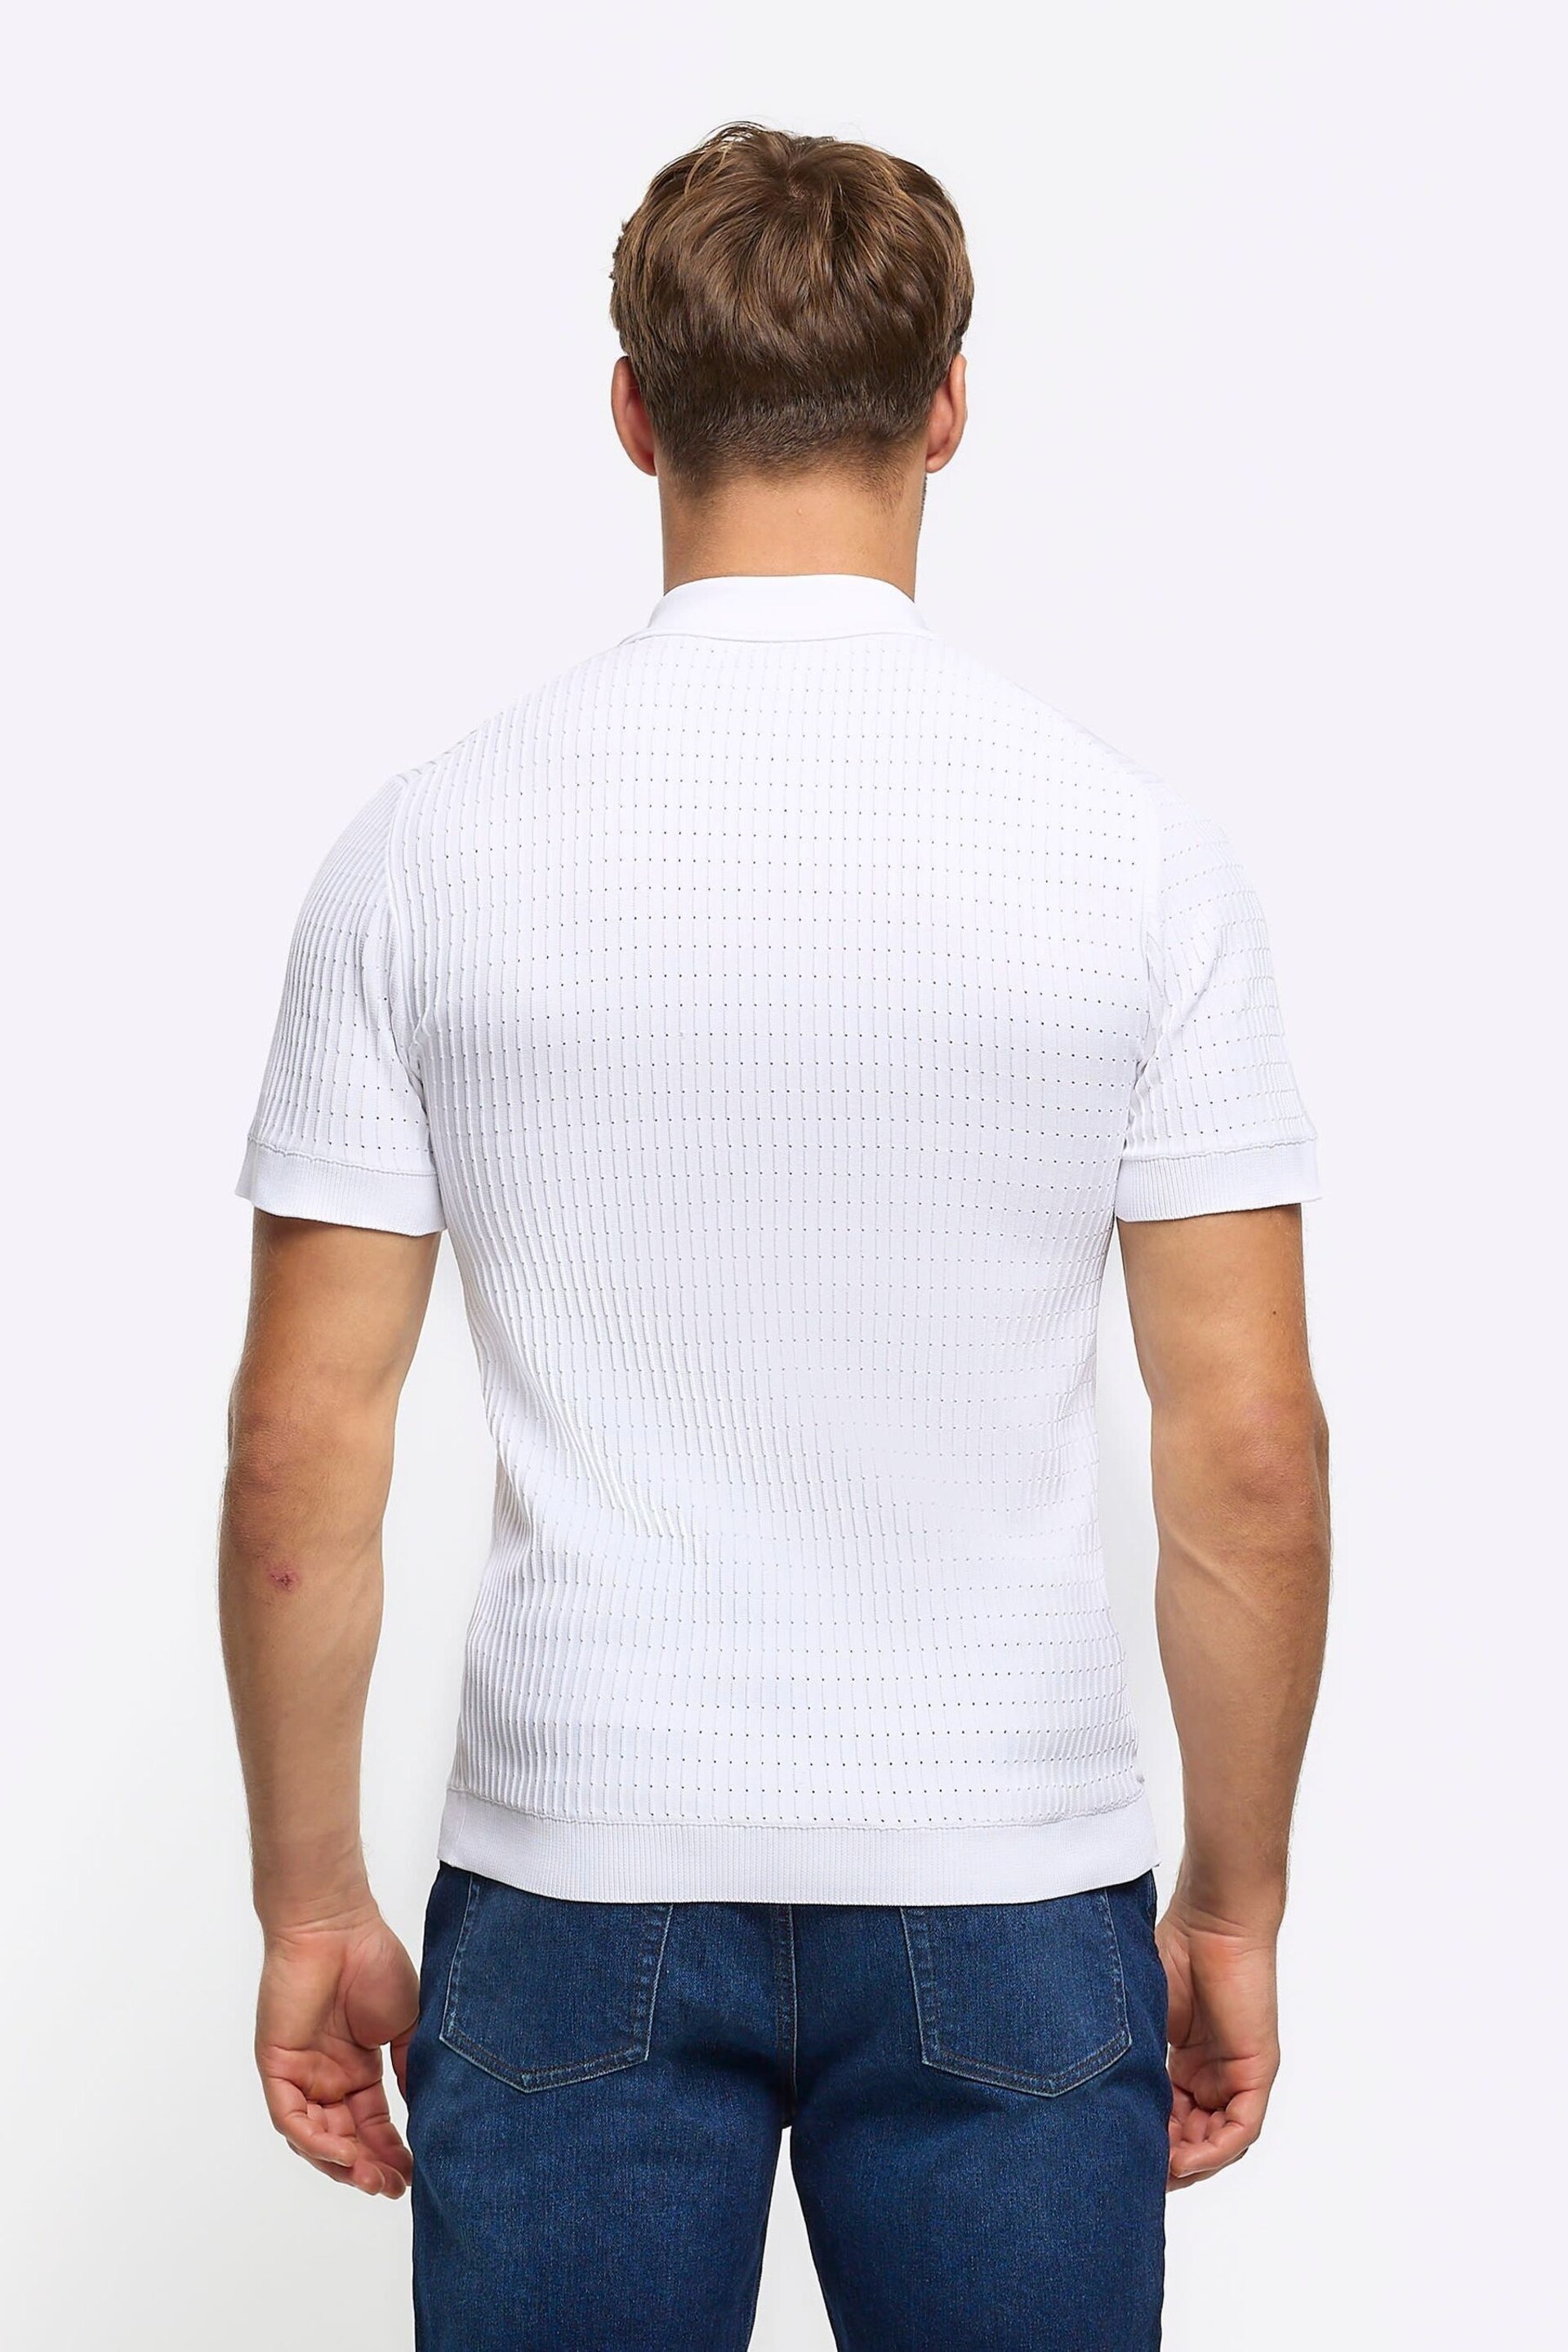 River Island White Muscle Fit Brick Polo Shirt - Image 2 of 4